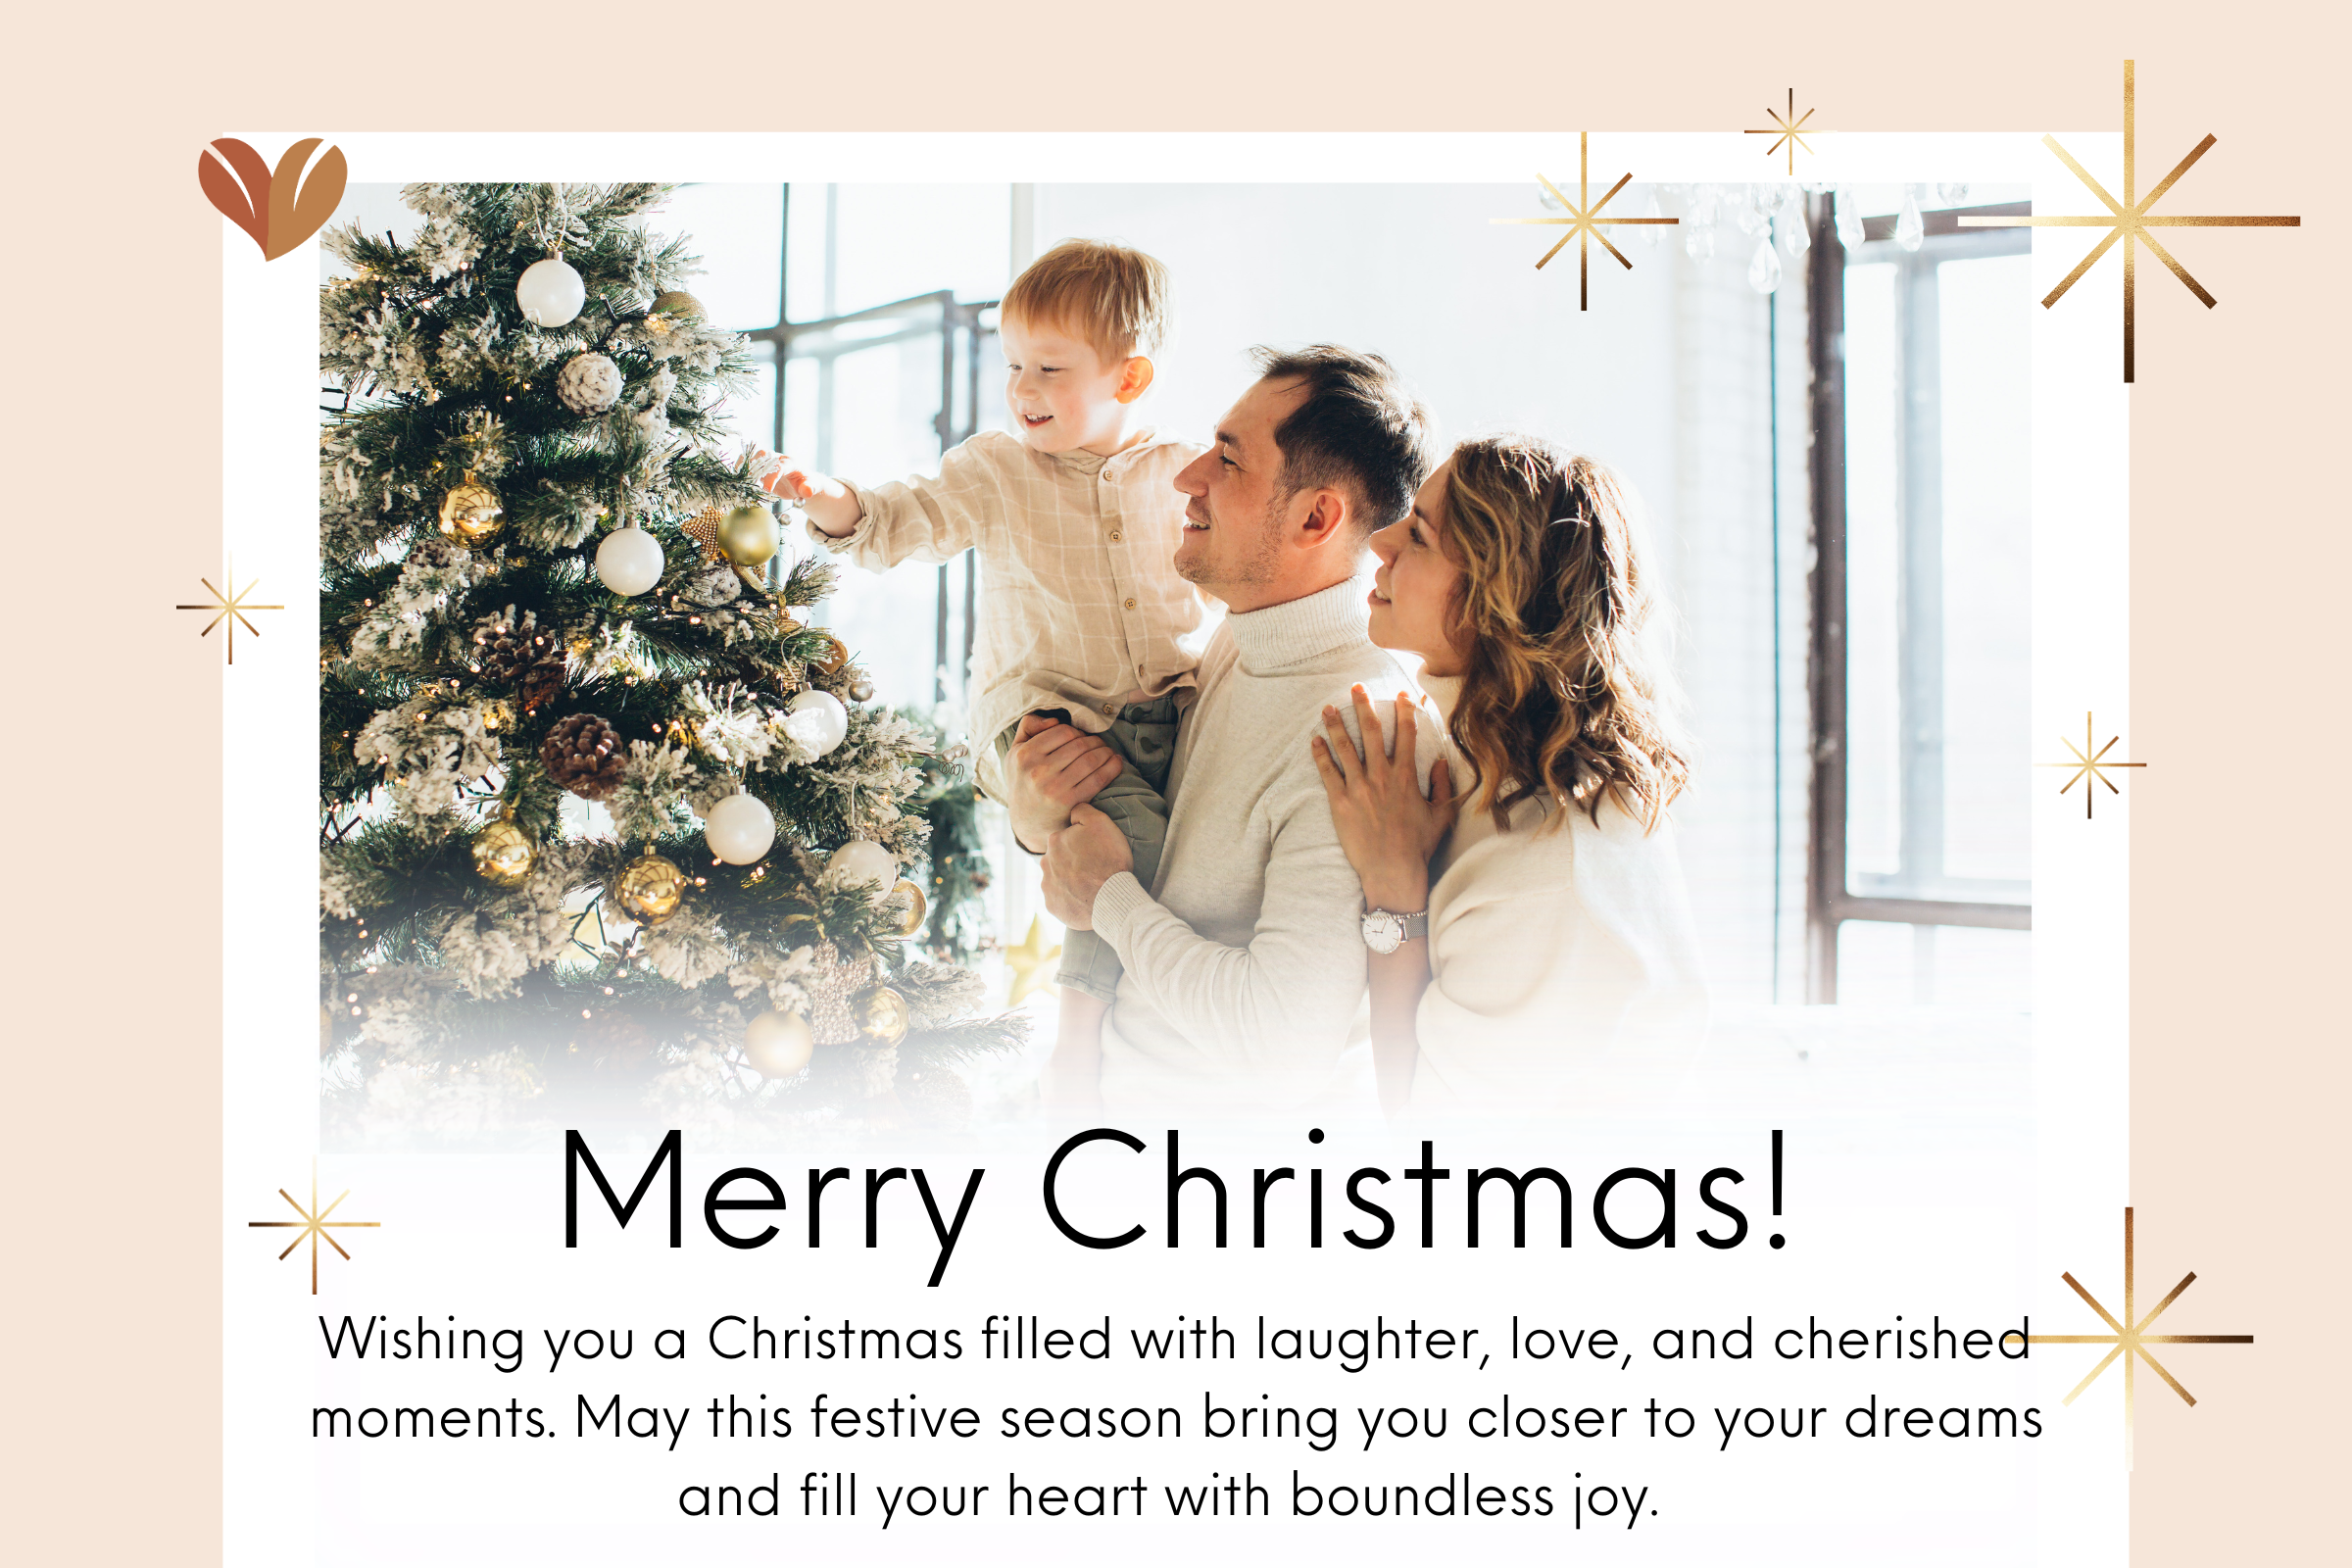 Heartwarming Christmas messages to your family members also makes them love you